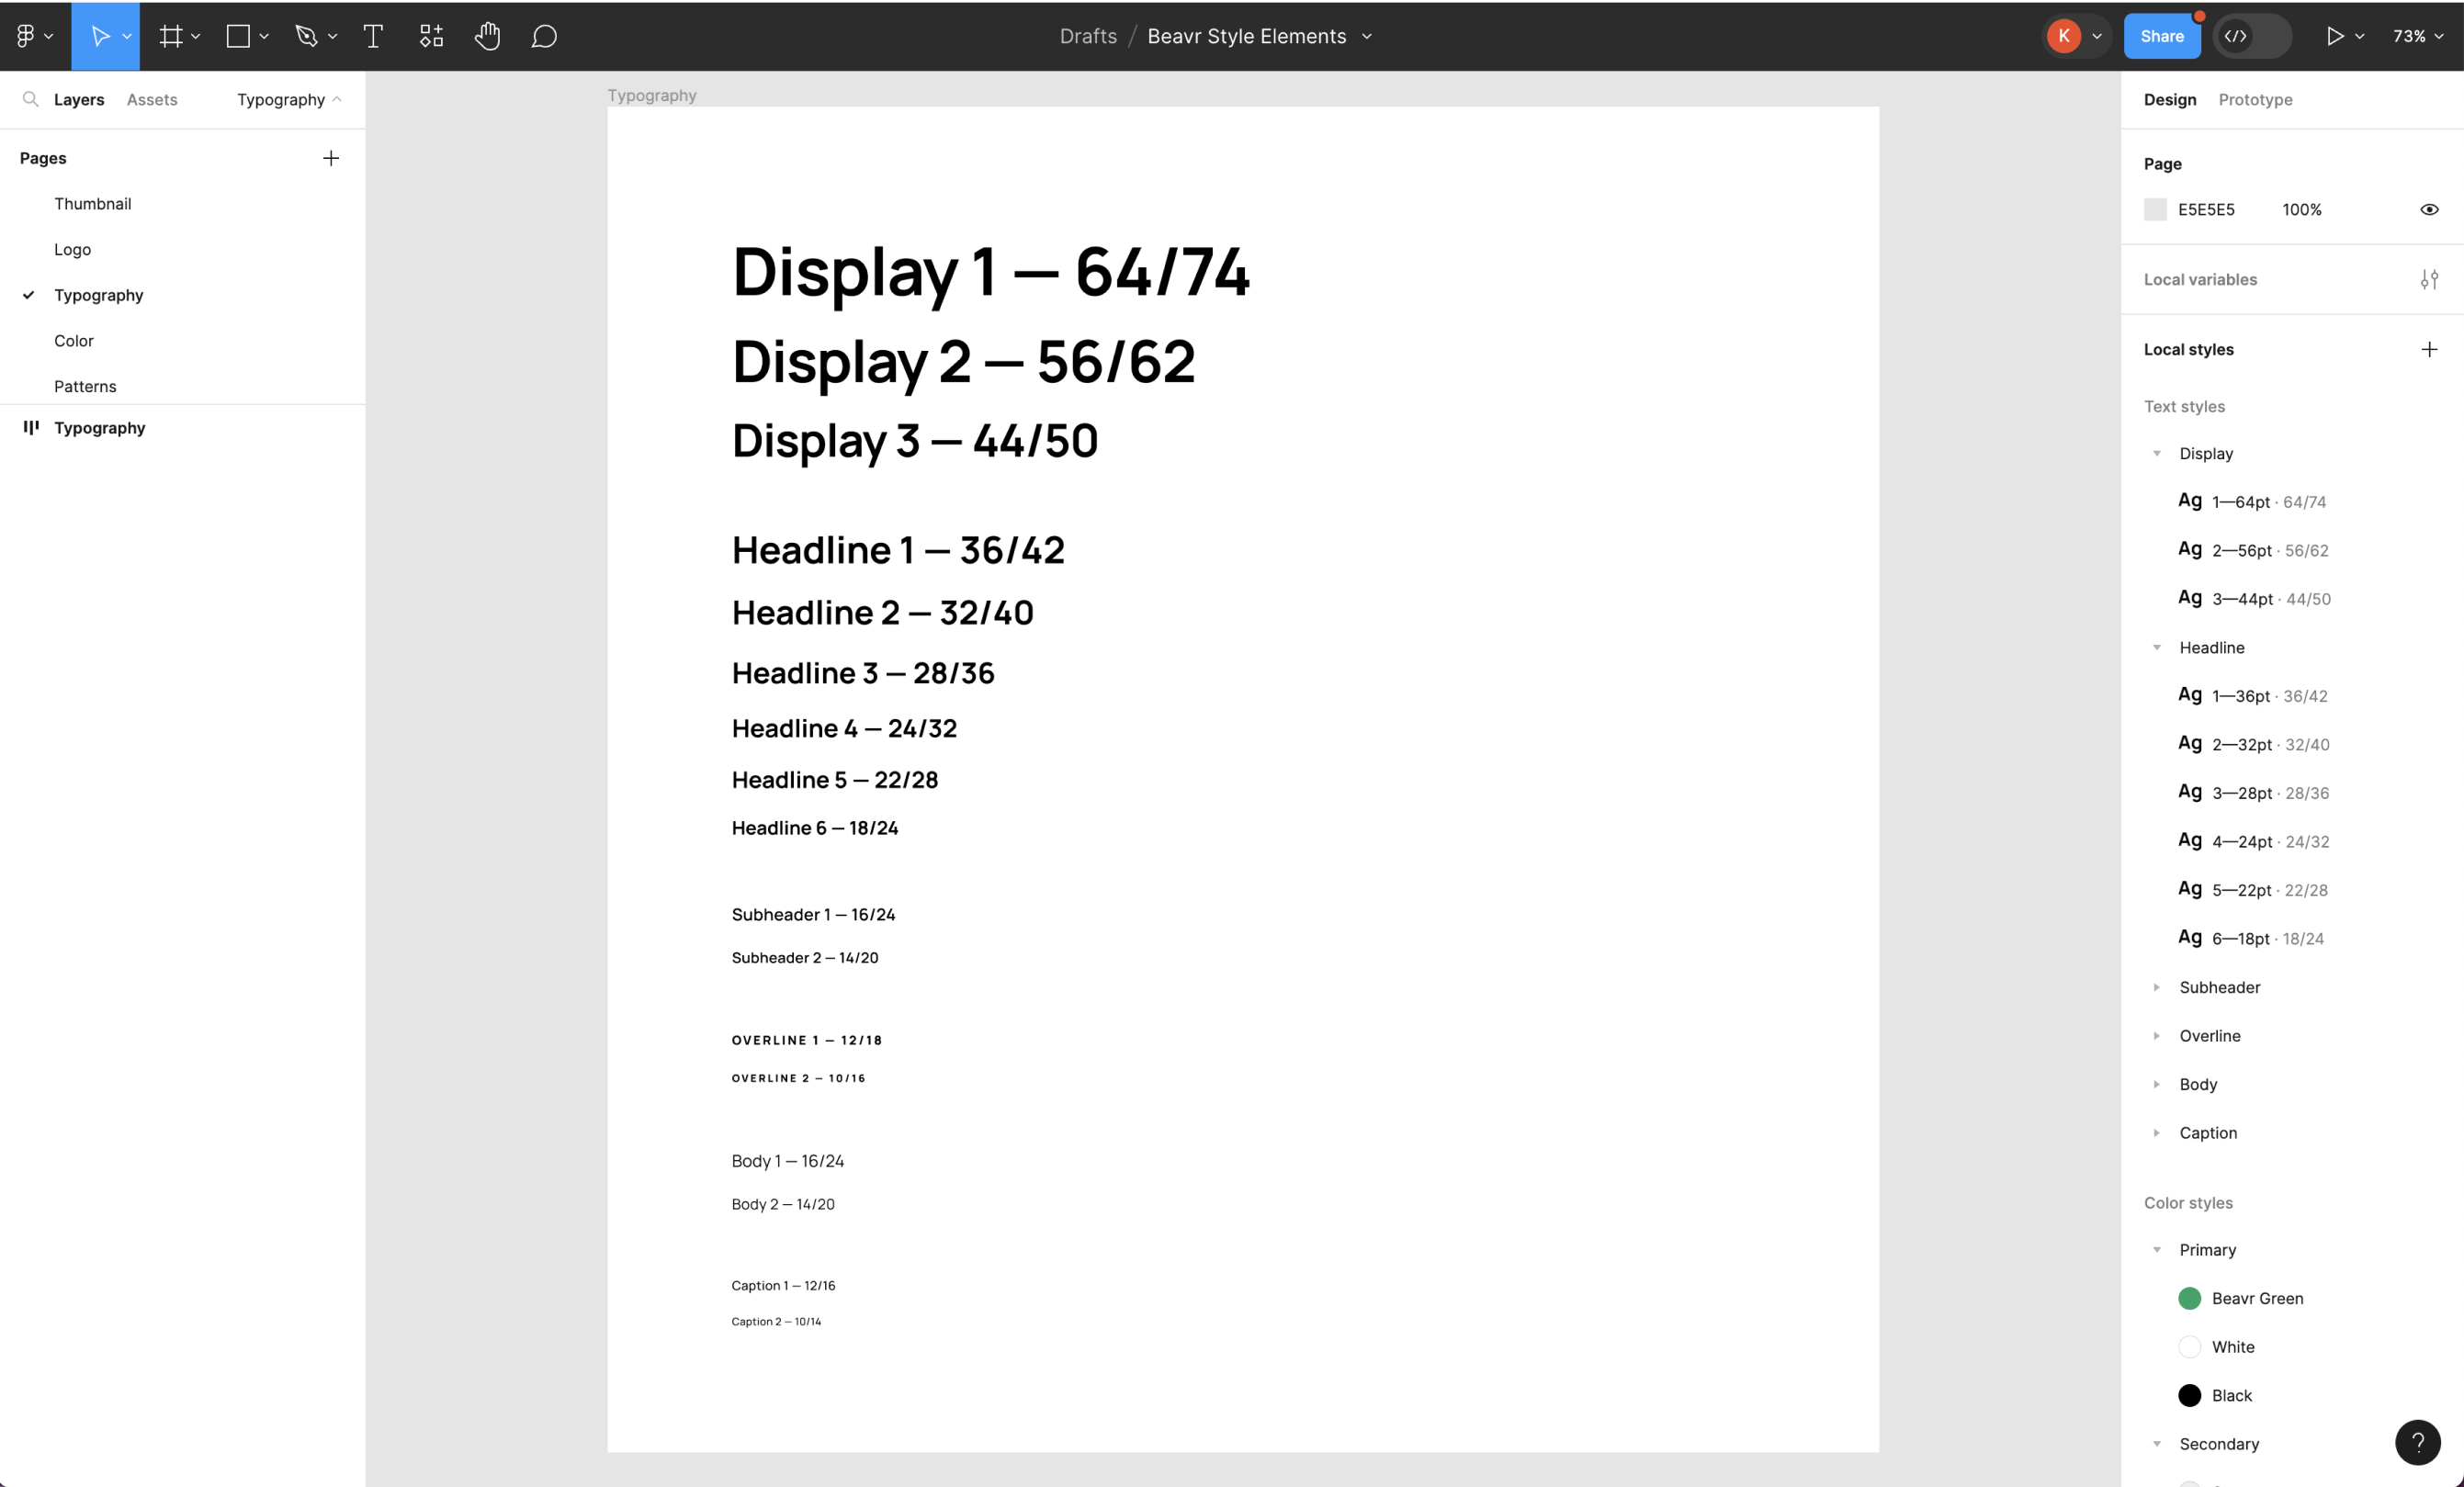 The typography section of the Figma deliverable corresponds to the rules laid out in the Style Guide. Beavr’s font set and color palette are setup as local styles, so designers can easily create consistent content.